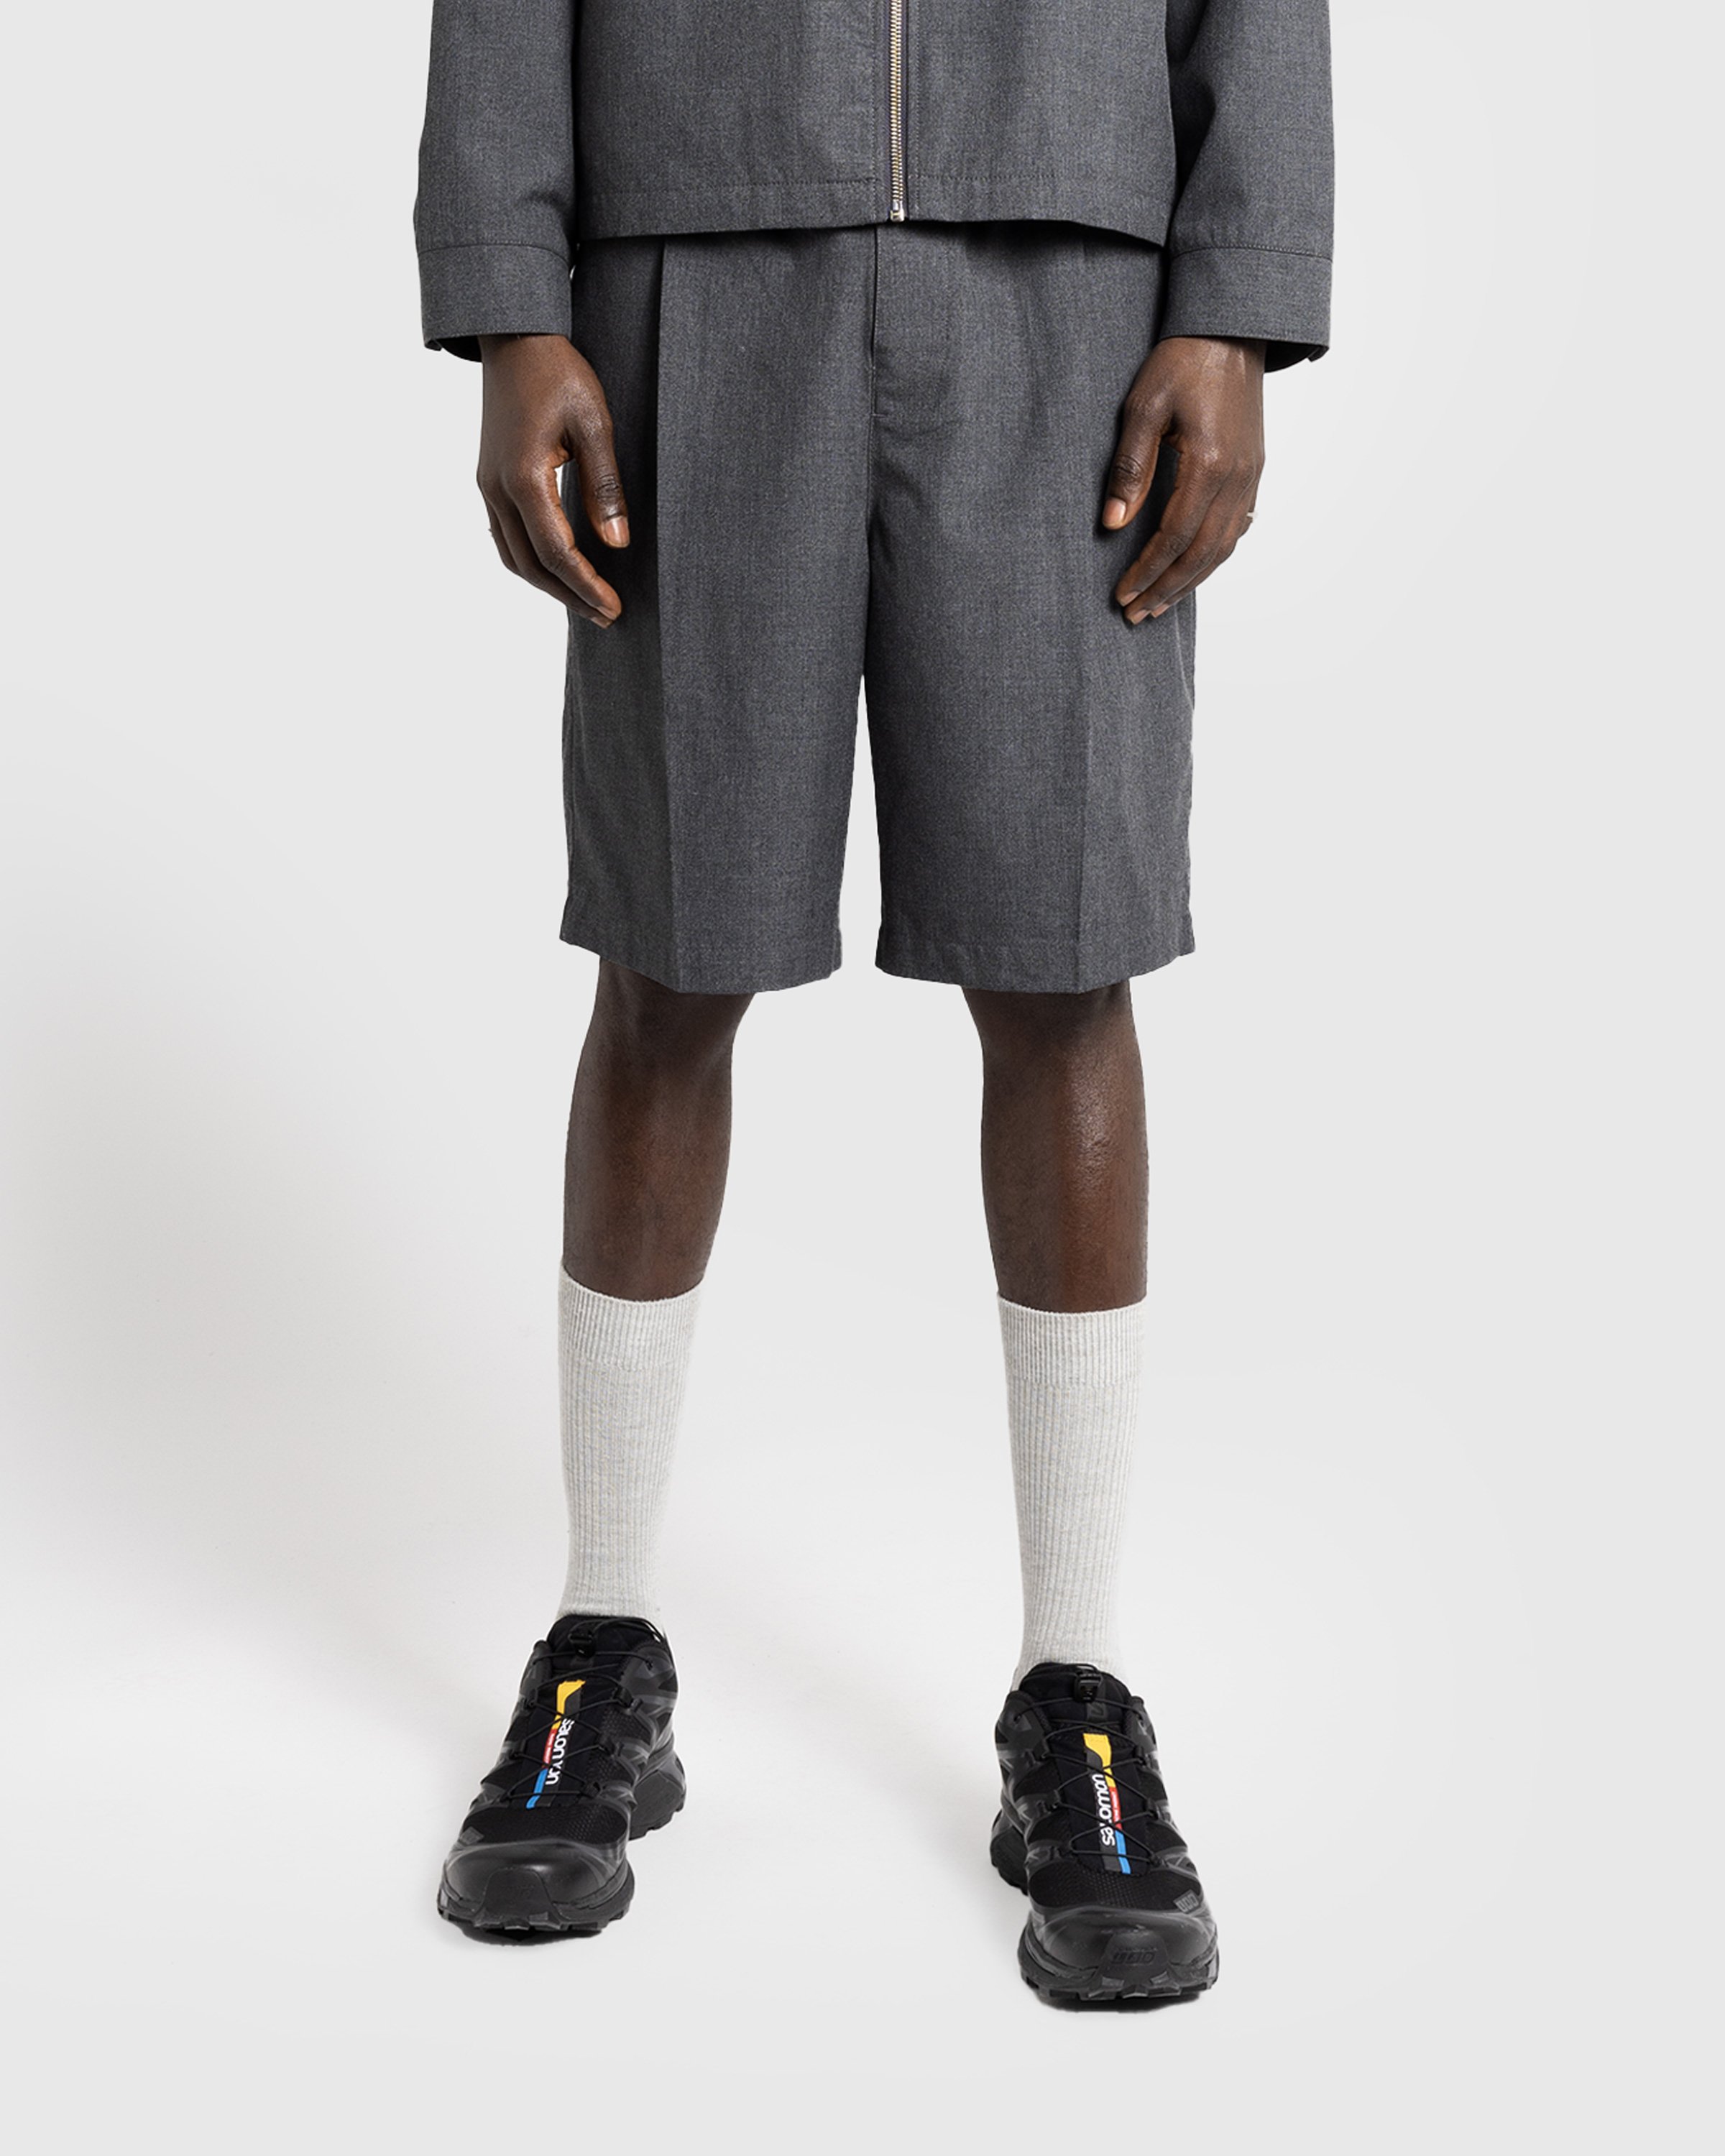 Highsnobiety HS05 - Tropical Suiting Shorts - Clothing - Grey - Image 3